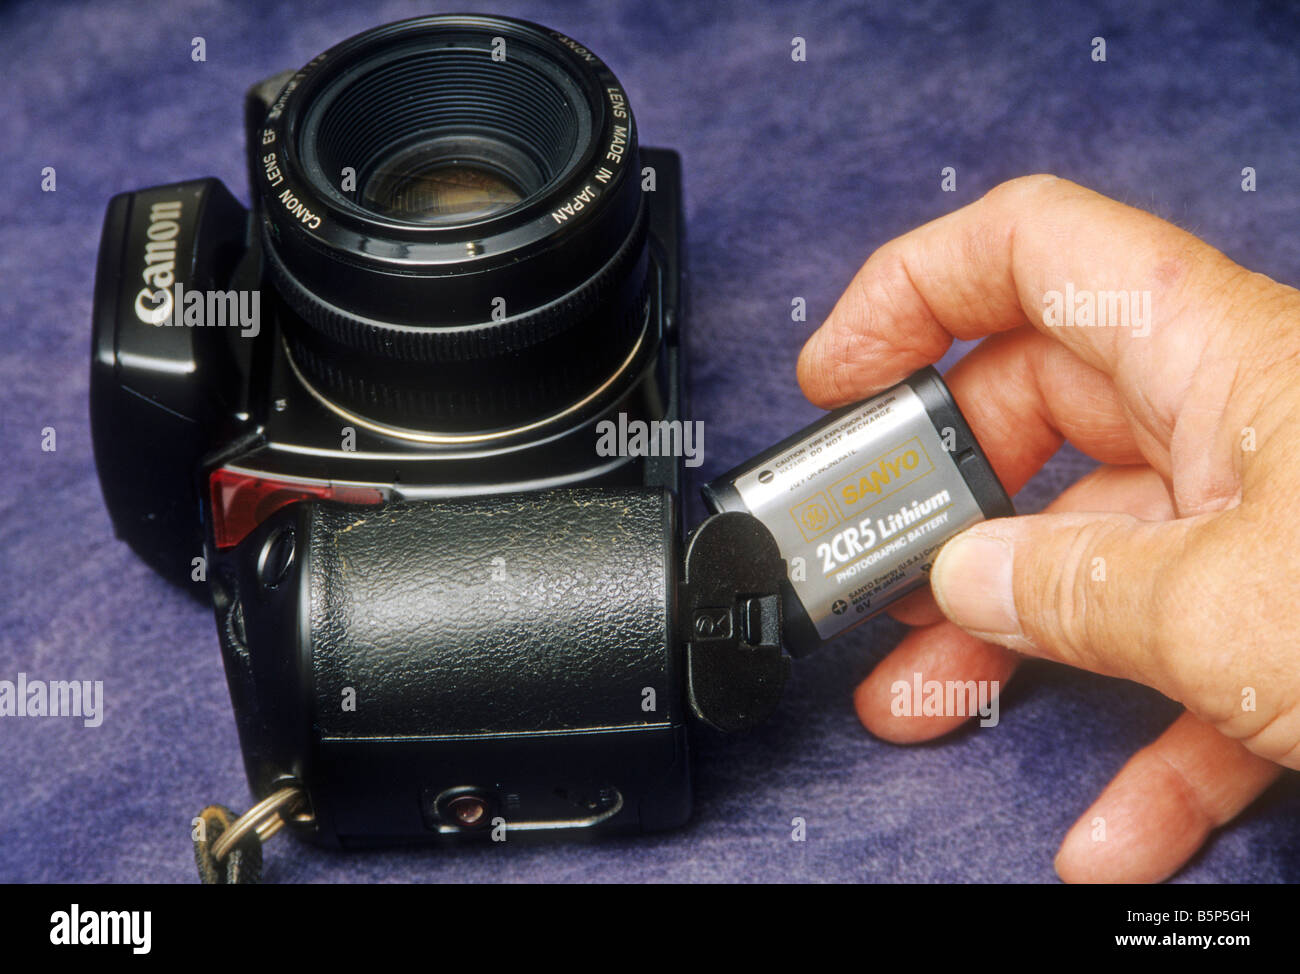 Battery is inserted into Canon 35mm camera Stock Photo - Alamy